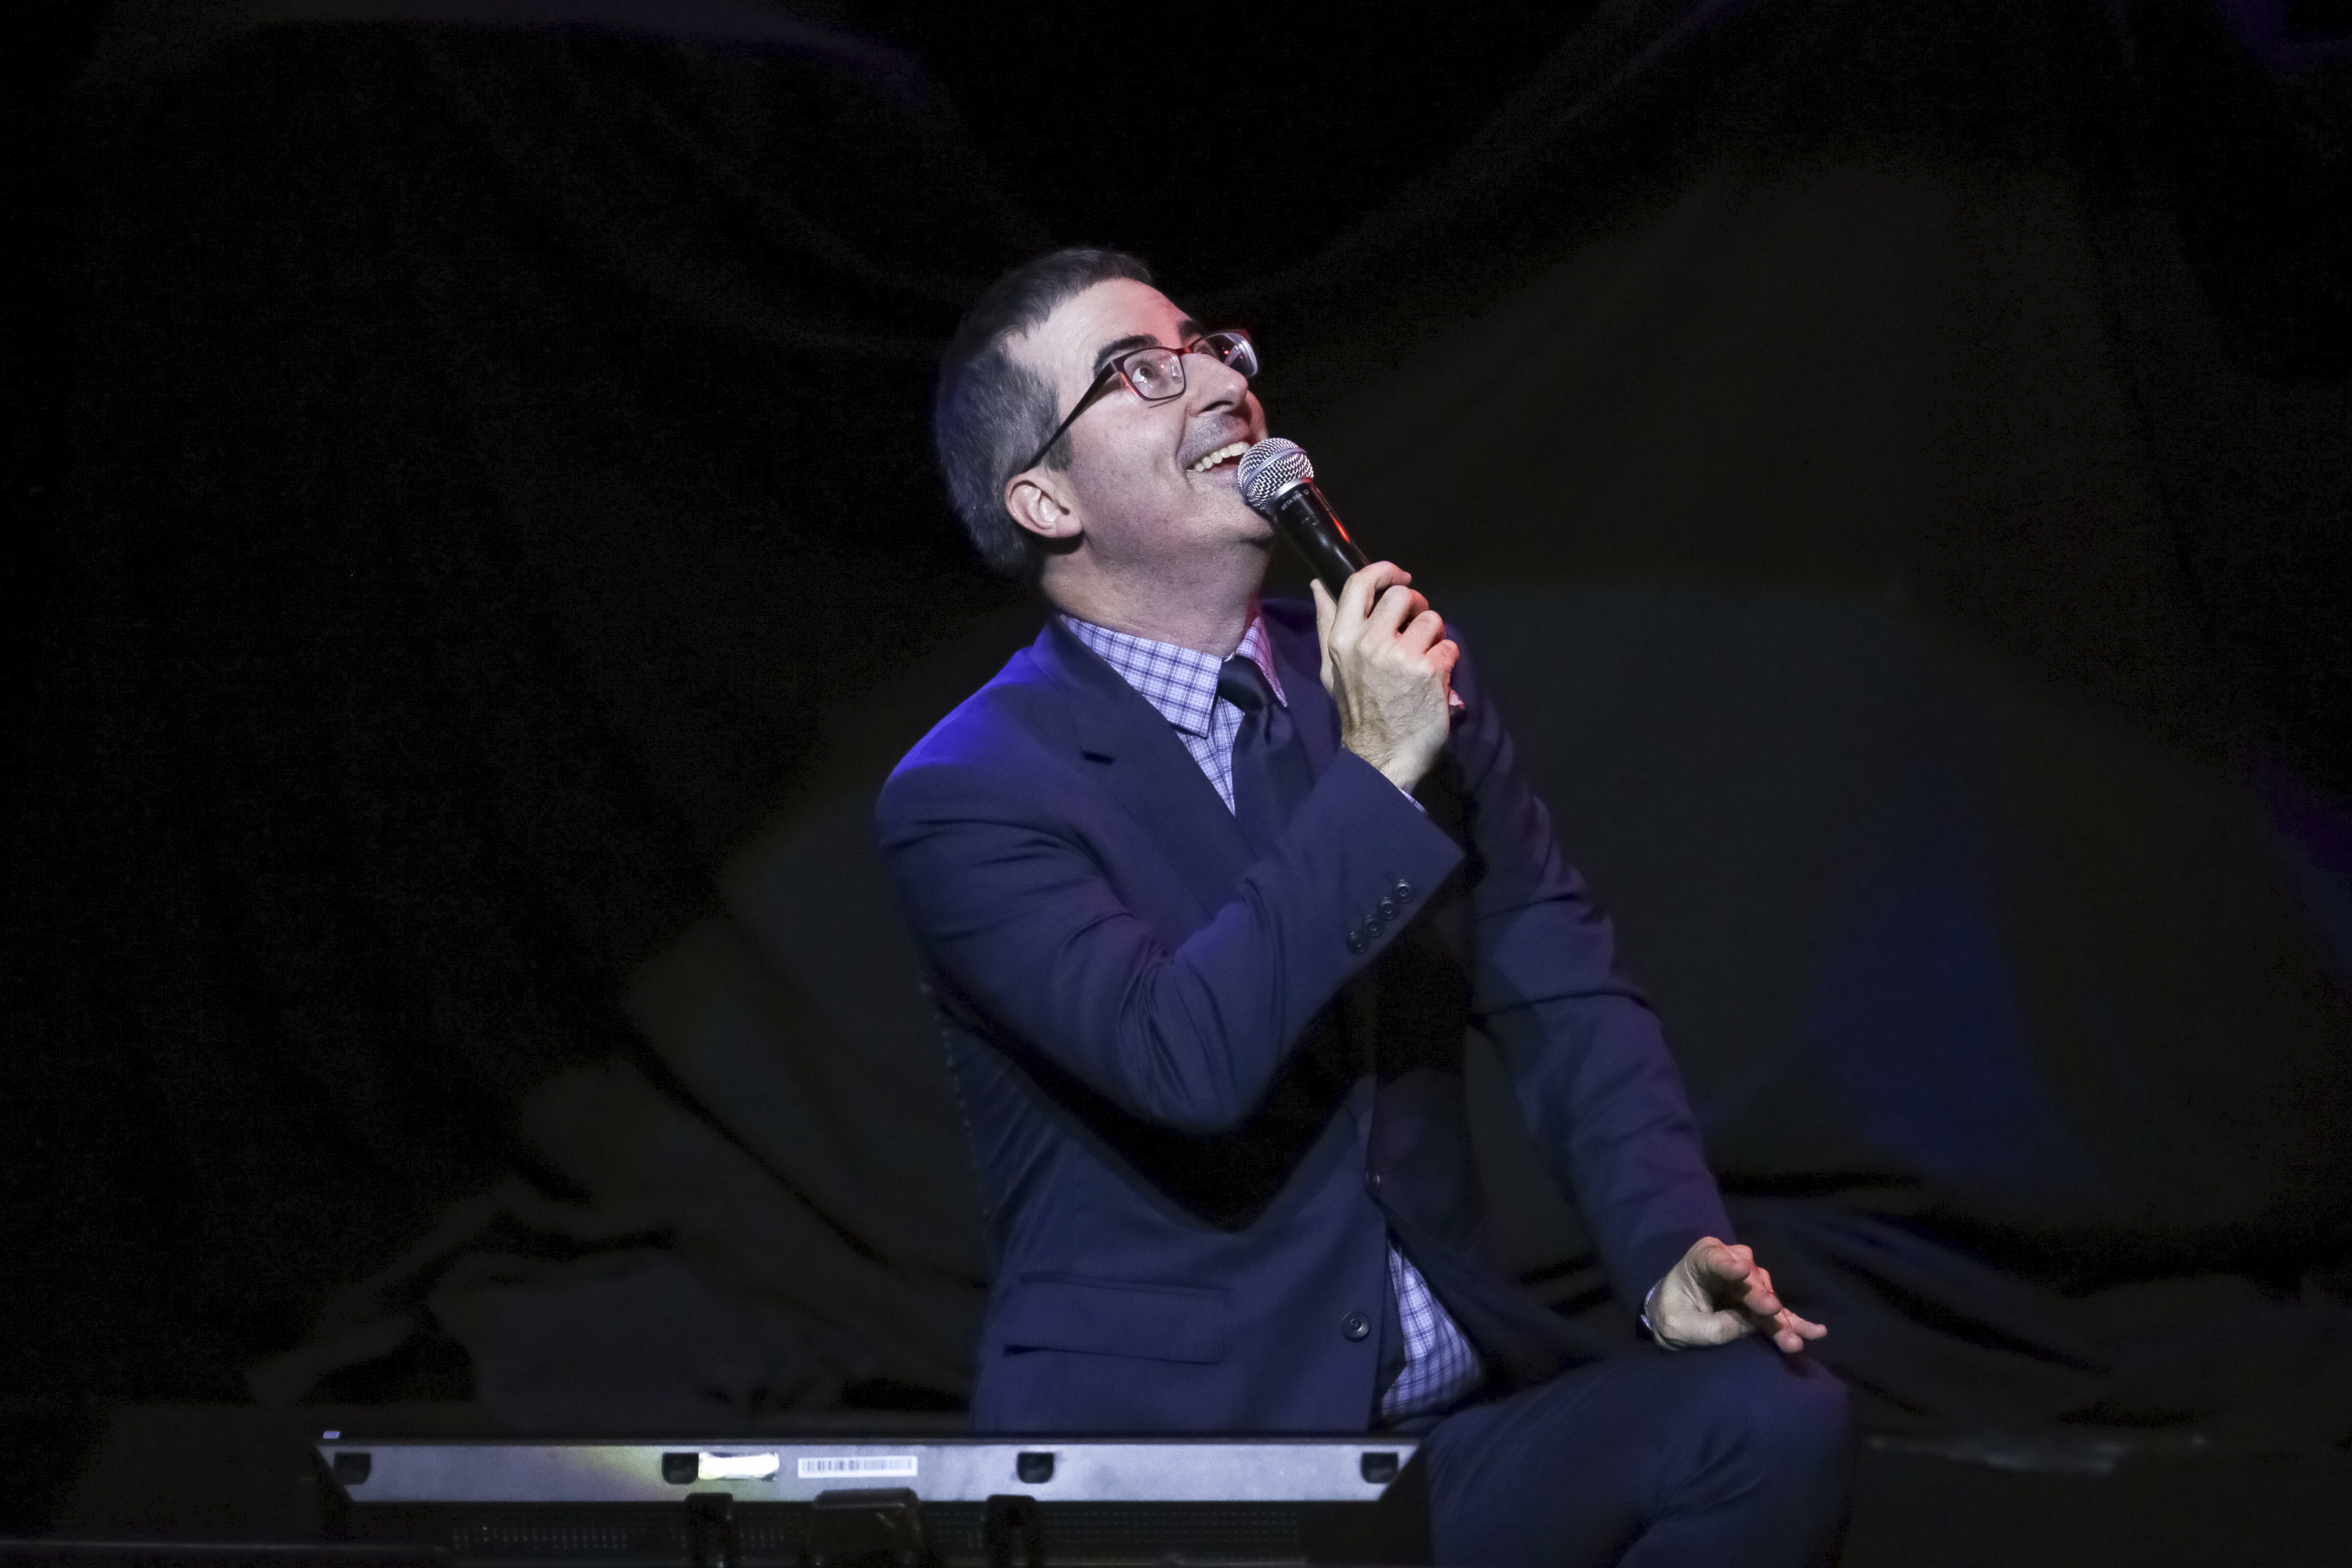 Comedien John Oliver’s humorous campaign for the puteketeke resulted in the bird claiming the Bird of the Century honour. Photo: Invision/AP